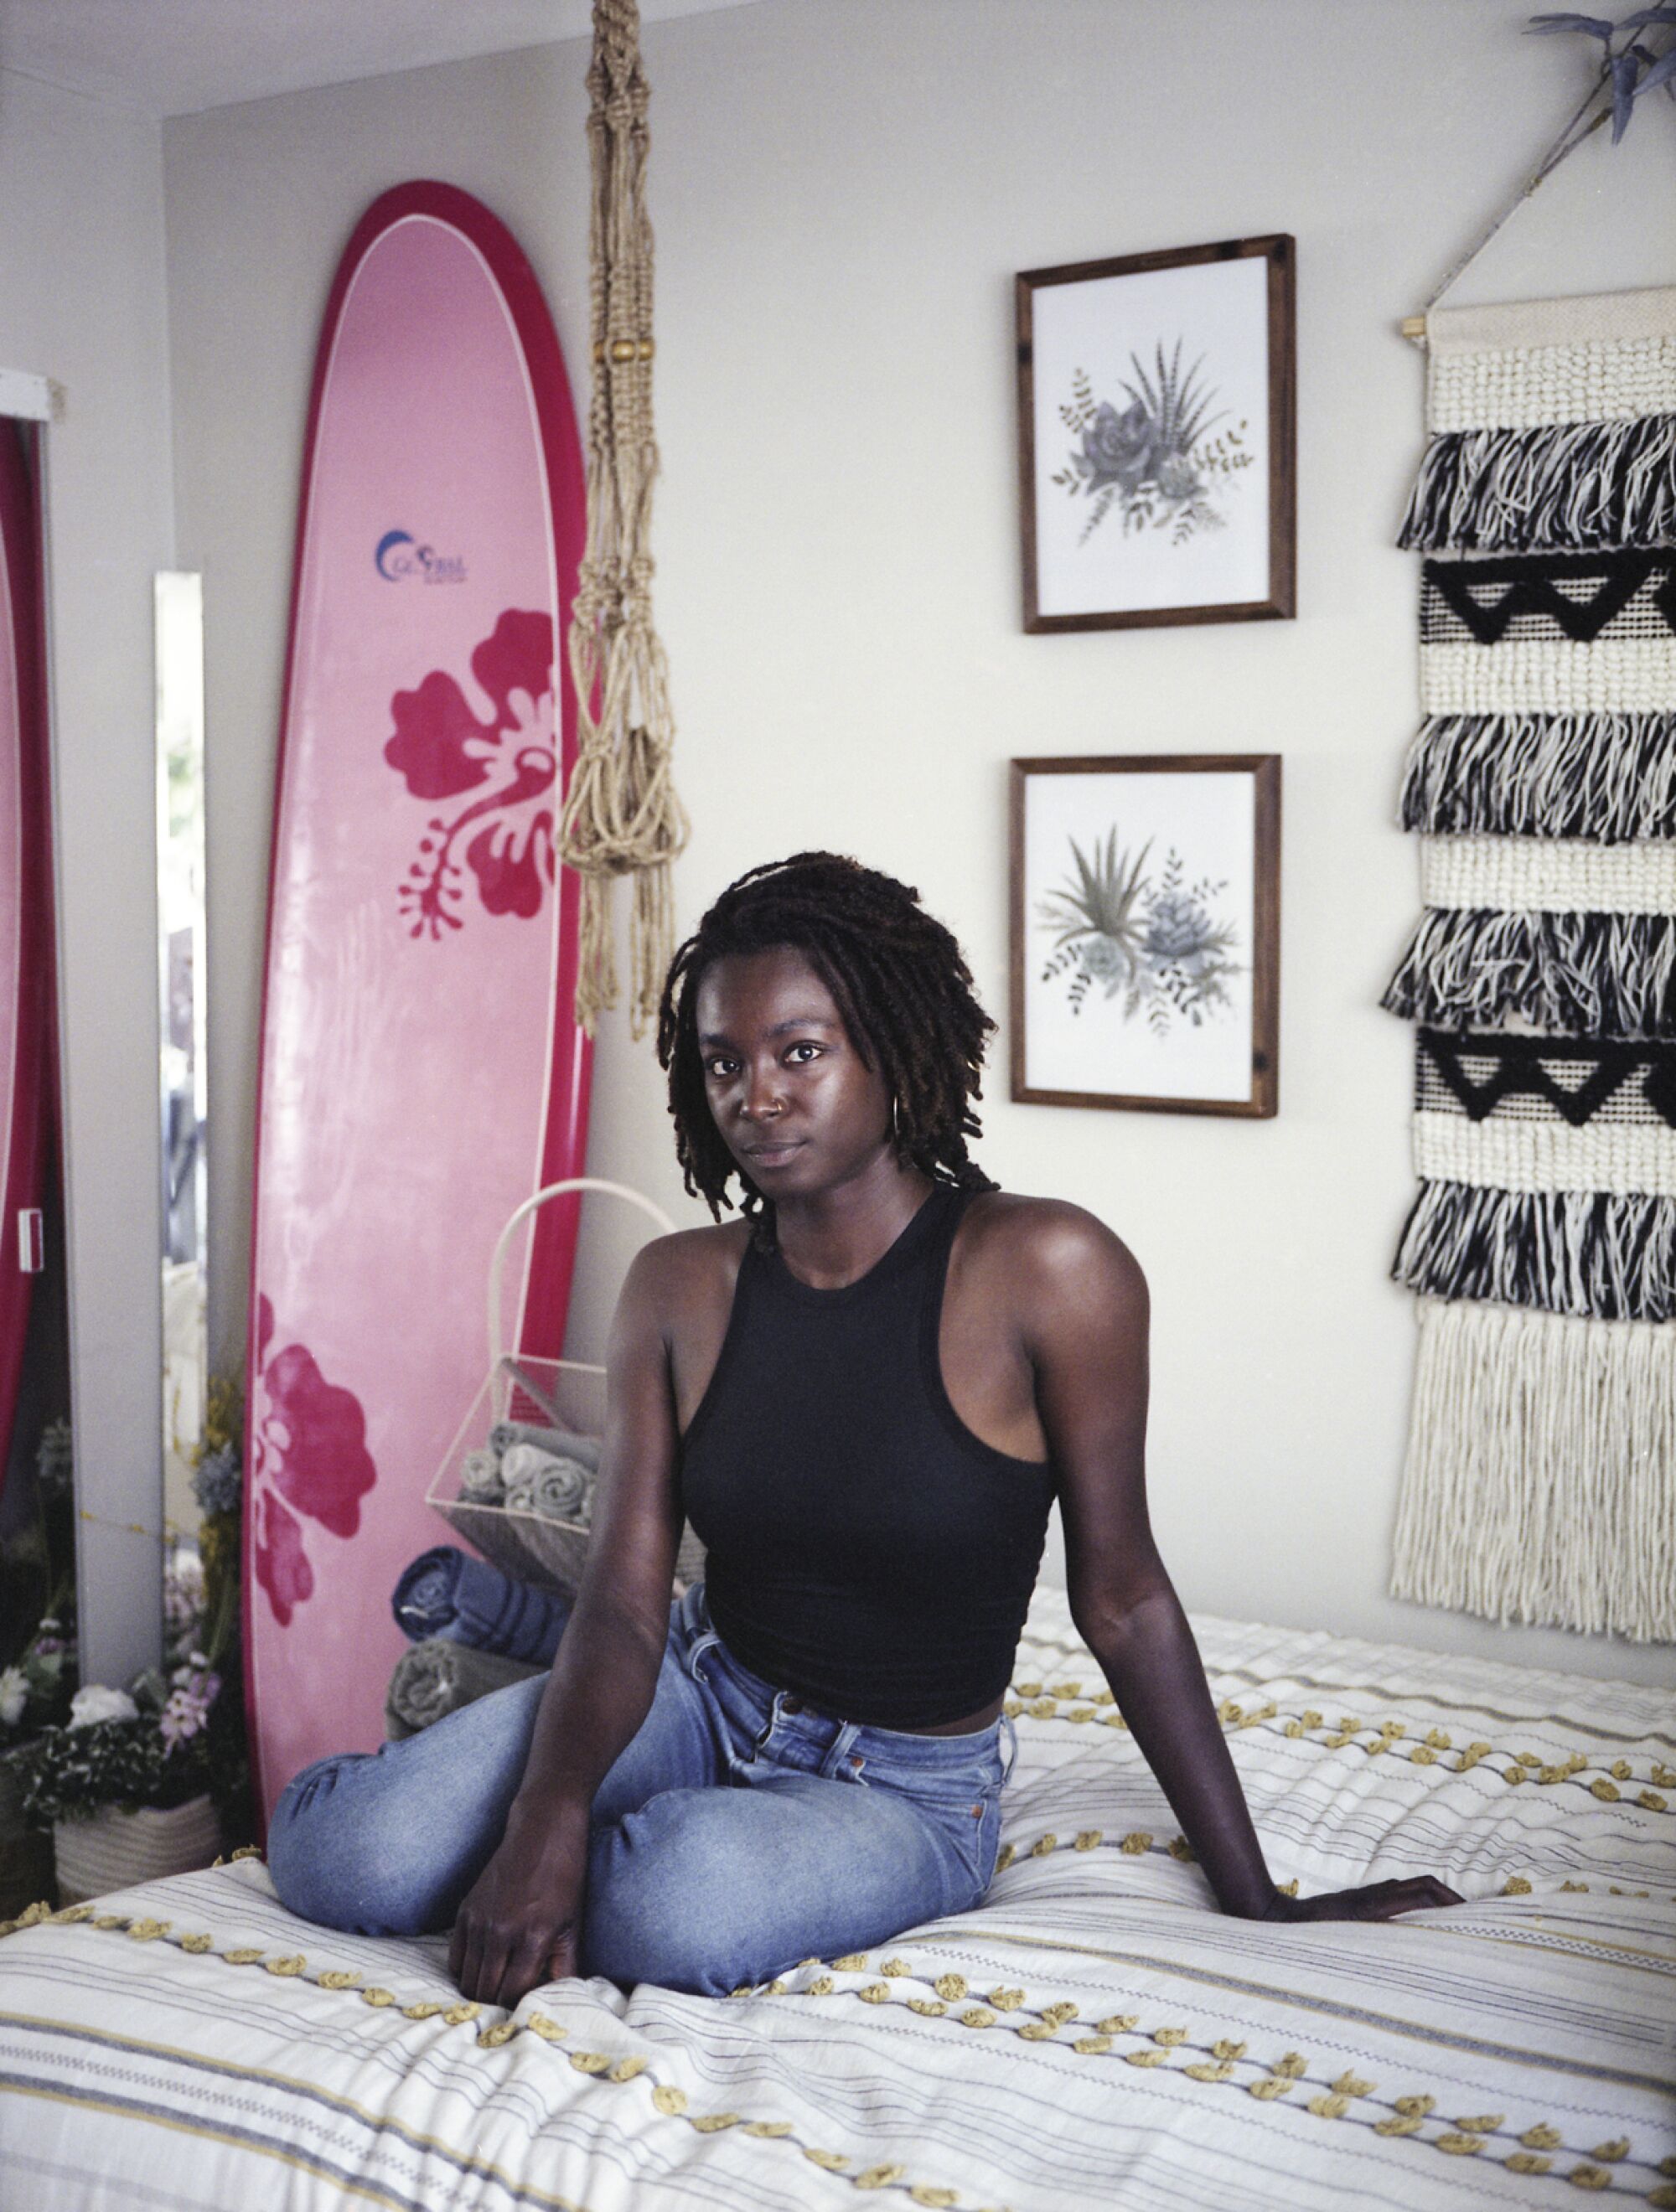 A surfer sits on her bed, a pink surfboard behind her.